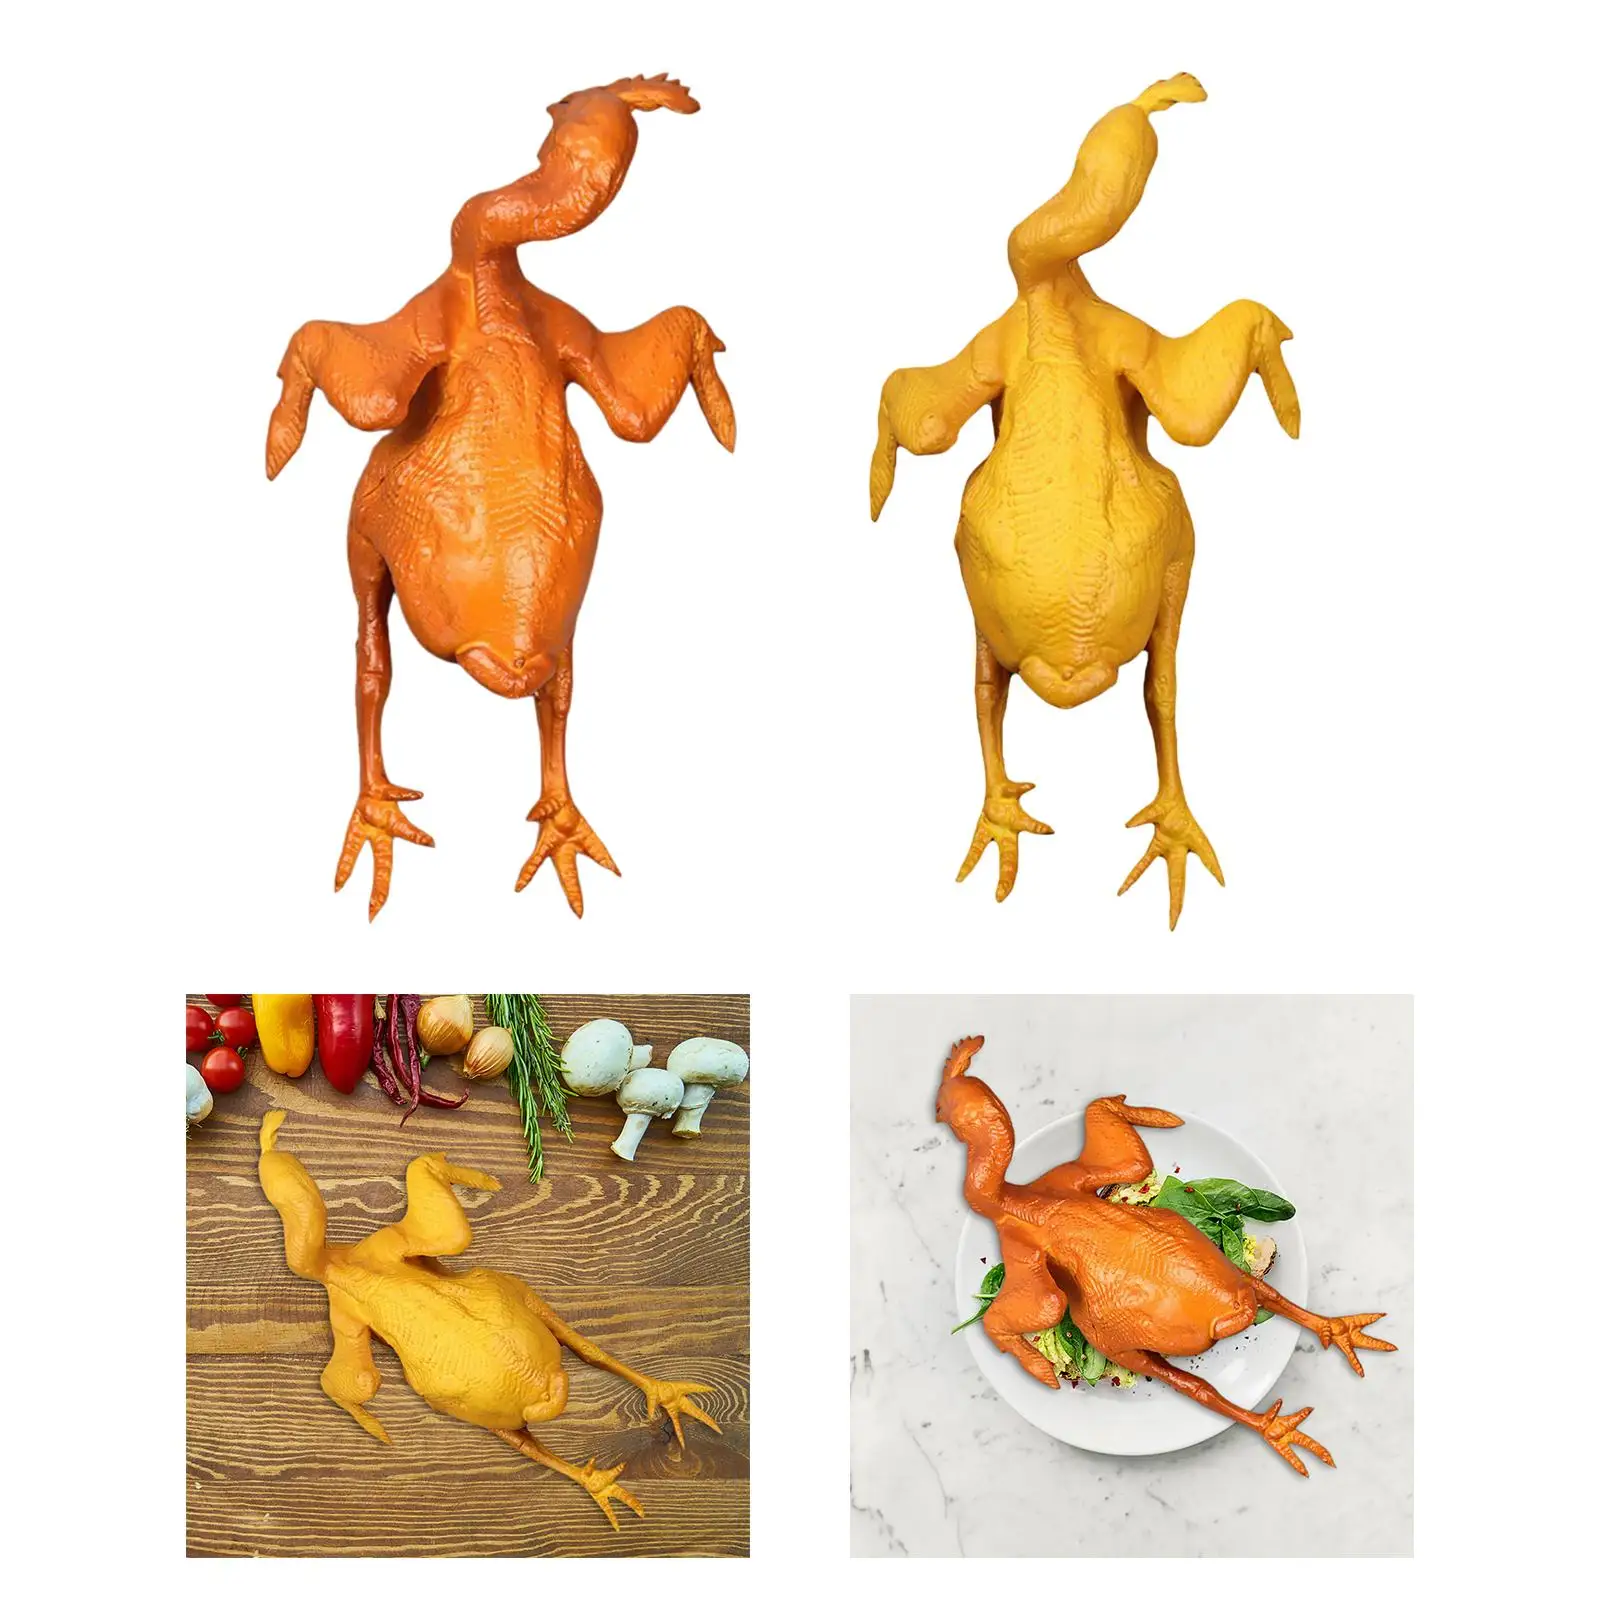 Roast Chicken Model Lifelike Fake Food Photography Props for Home Kitchen Cabinet Thanksgiving Party Dining Table Decoration